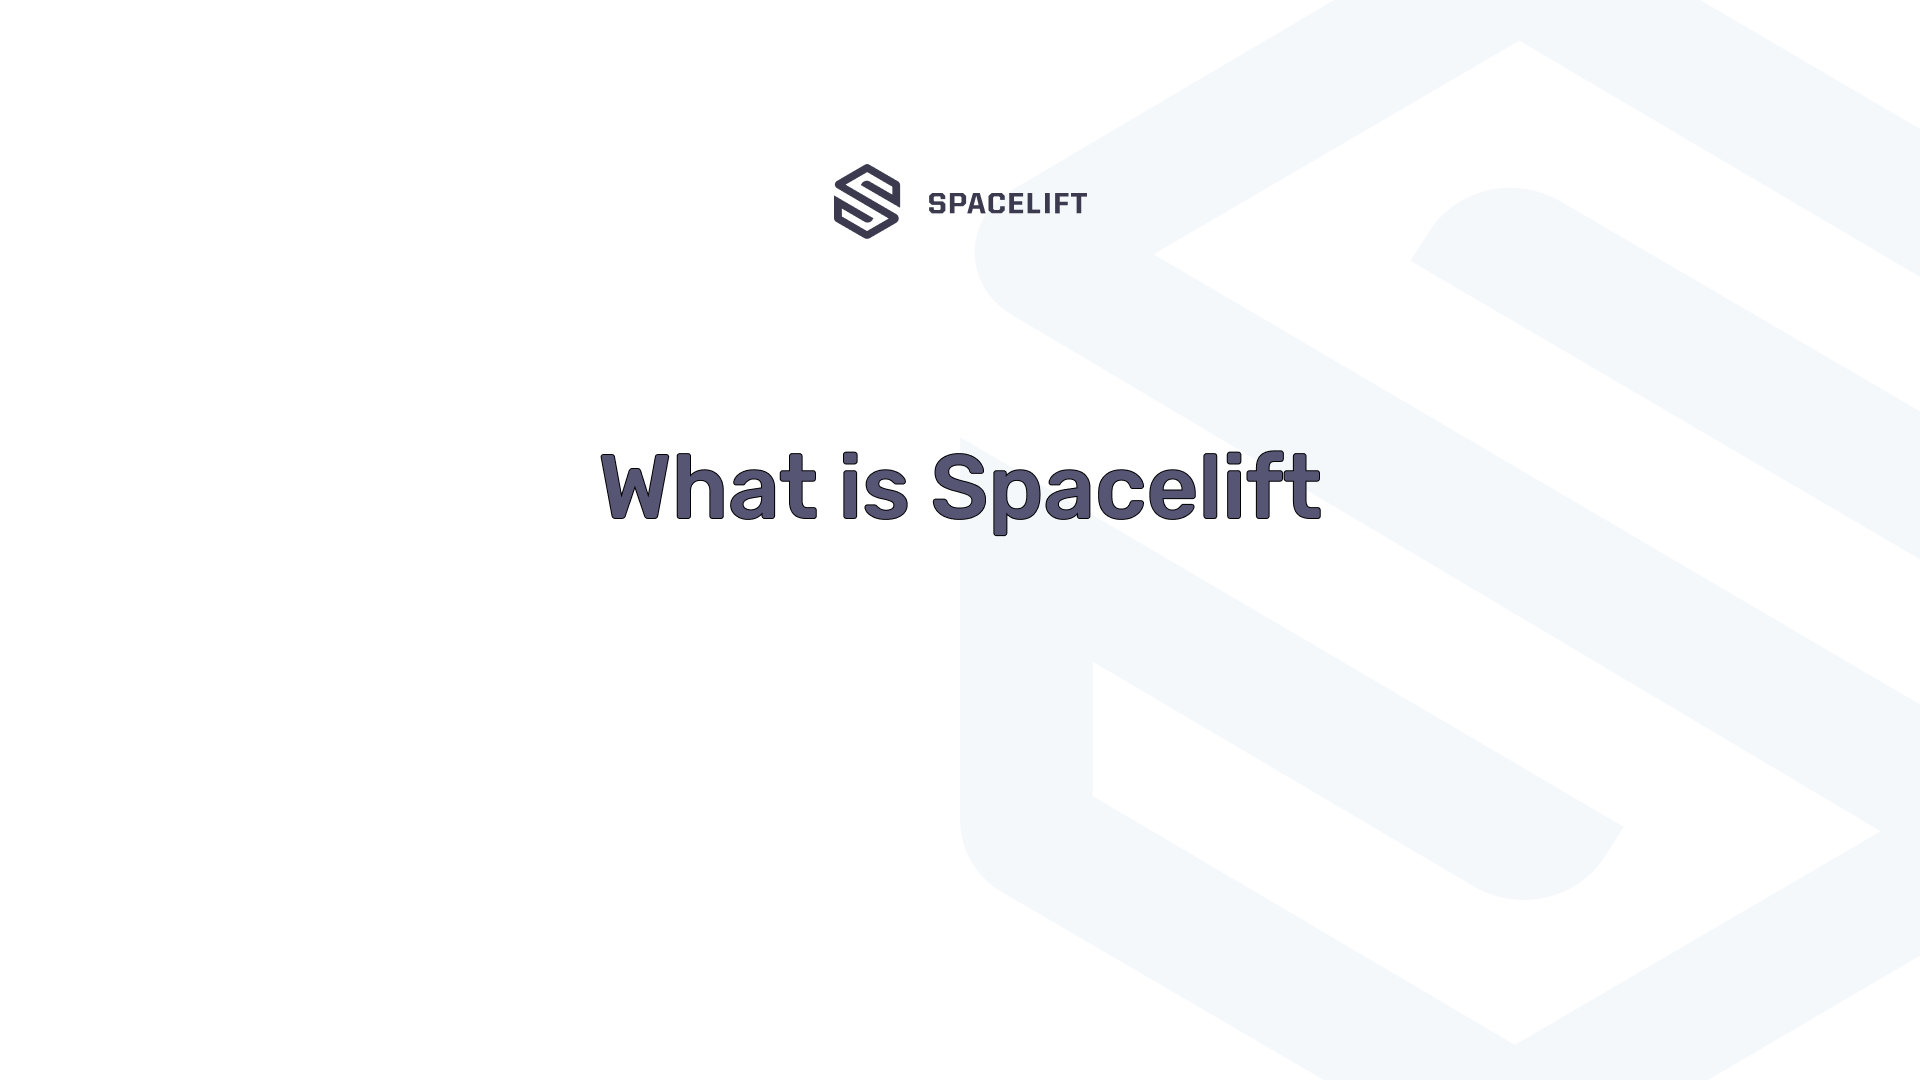 What is spacelift